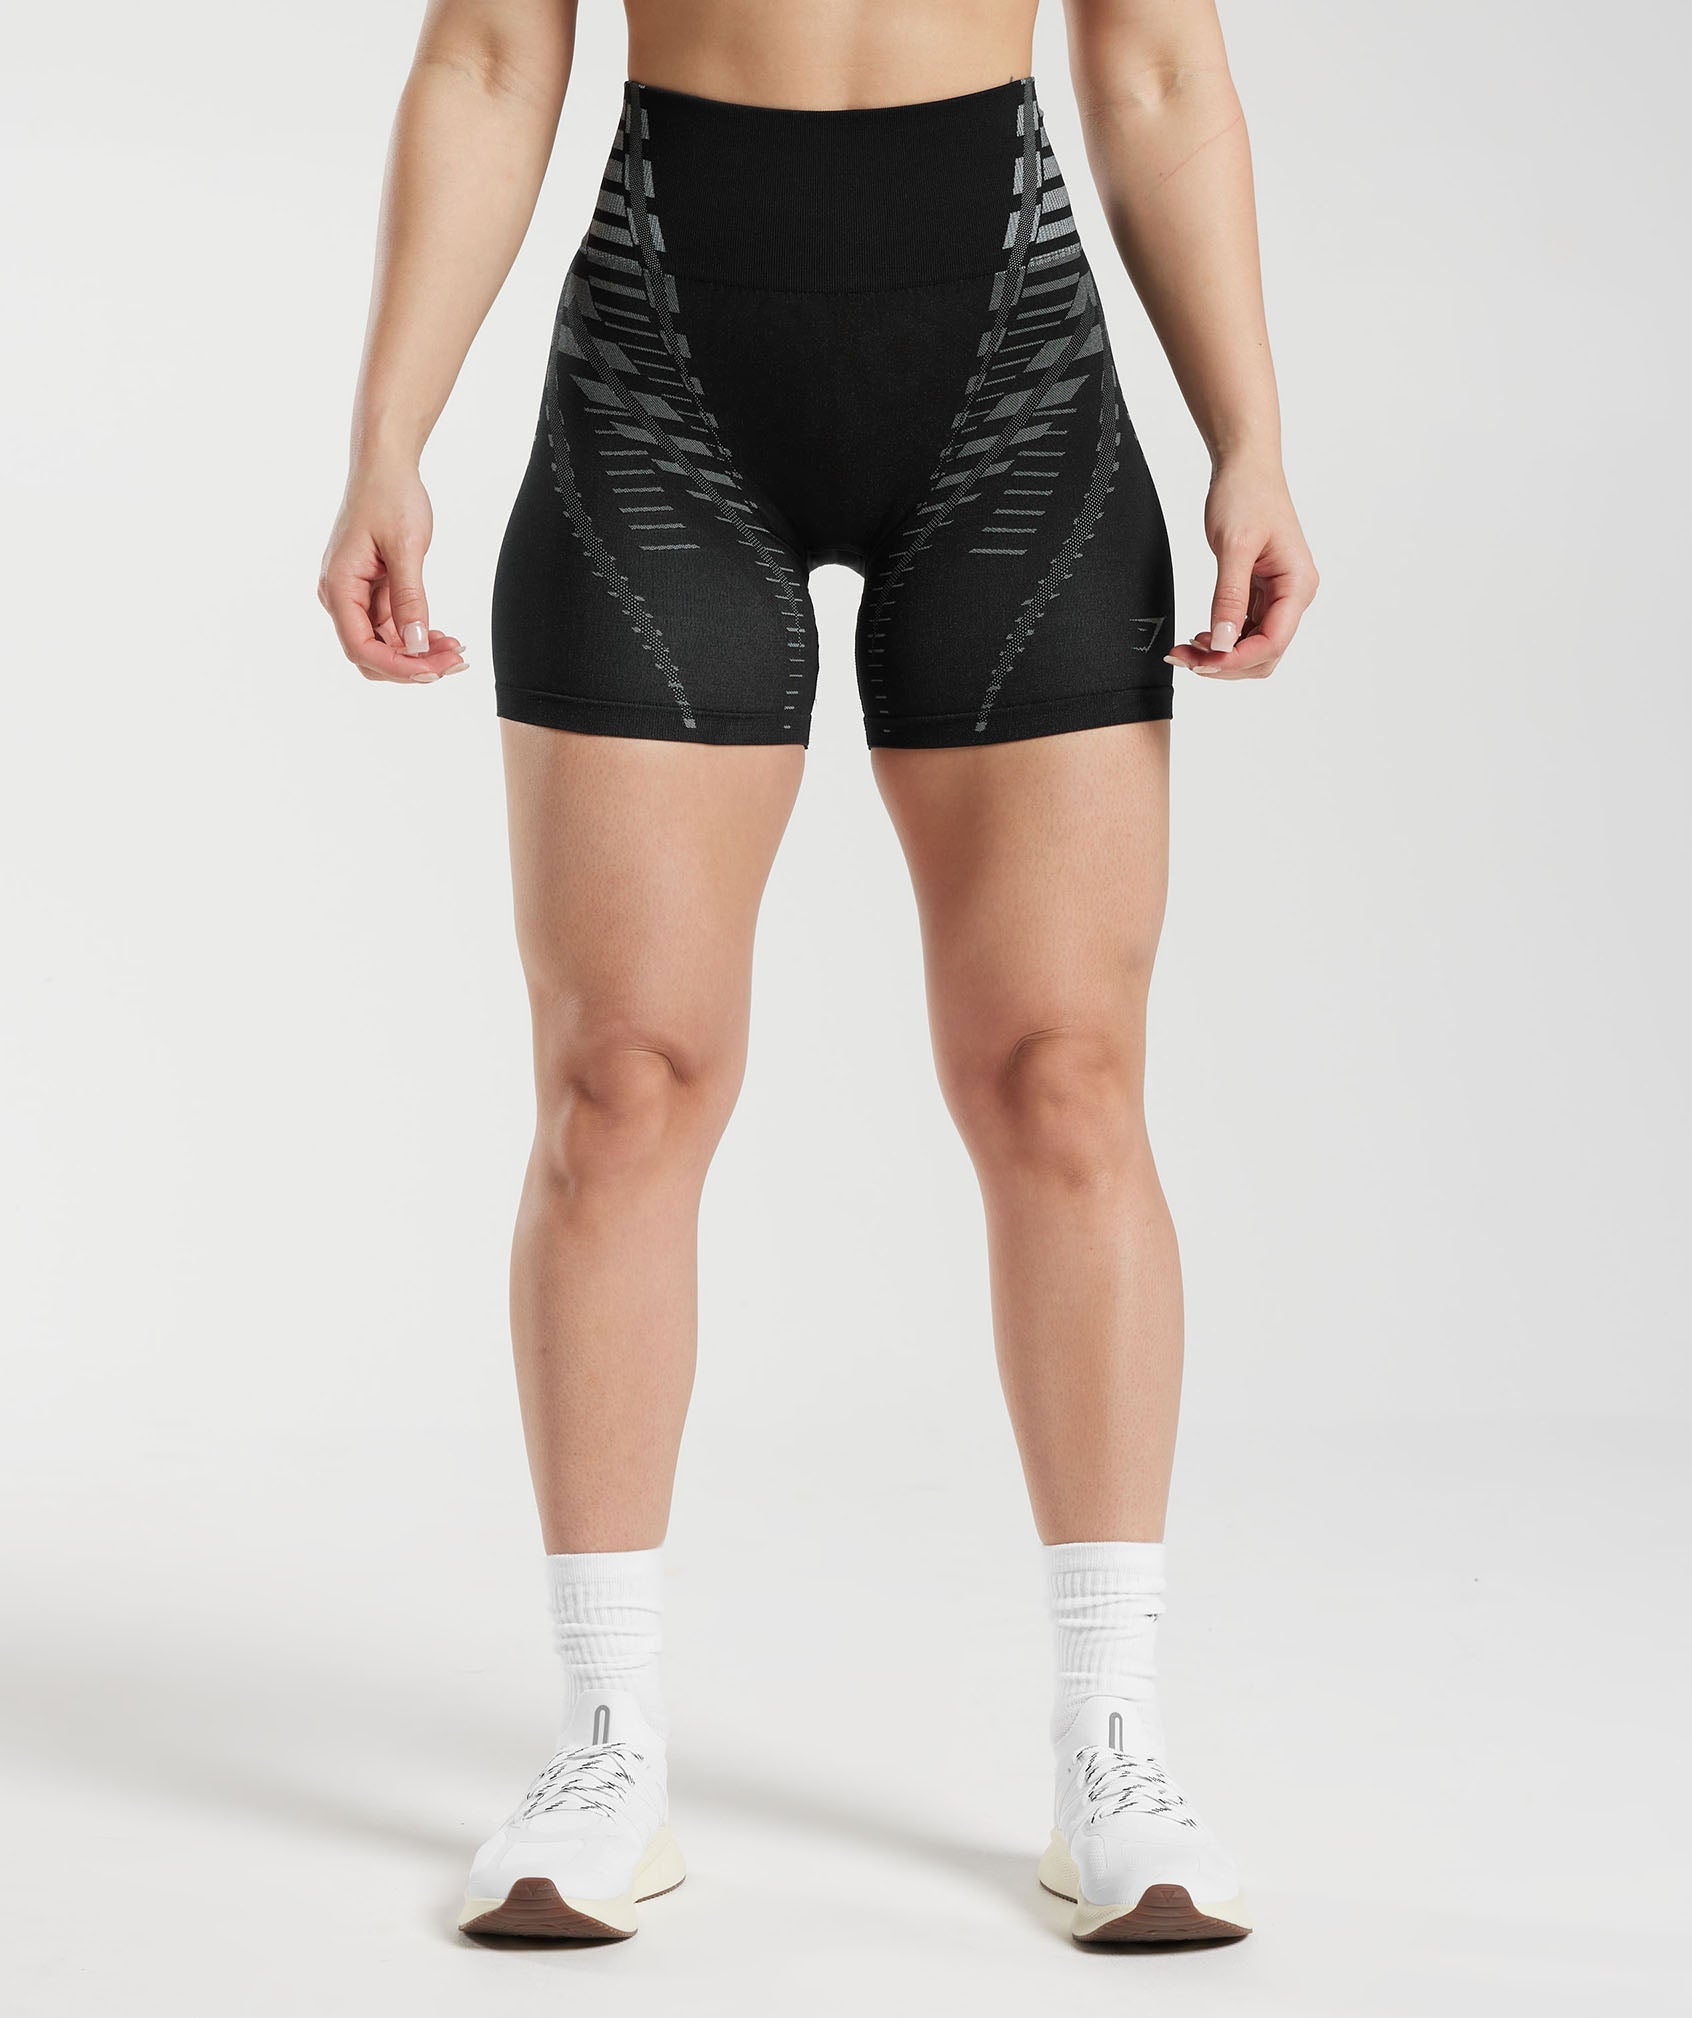 Apex Limit Shorts in Black/Light Grey - view 1